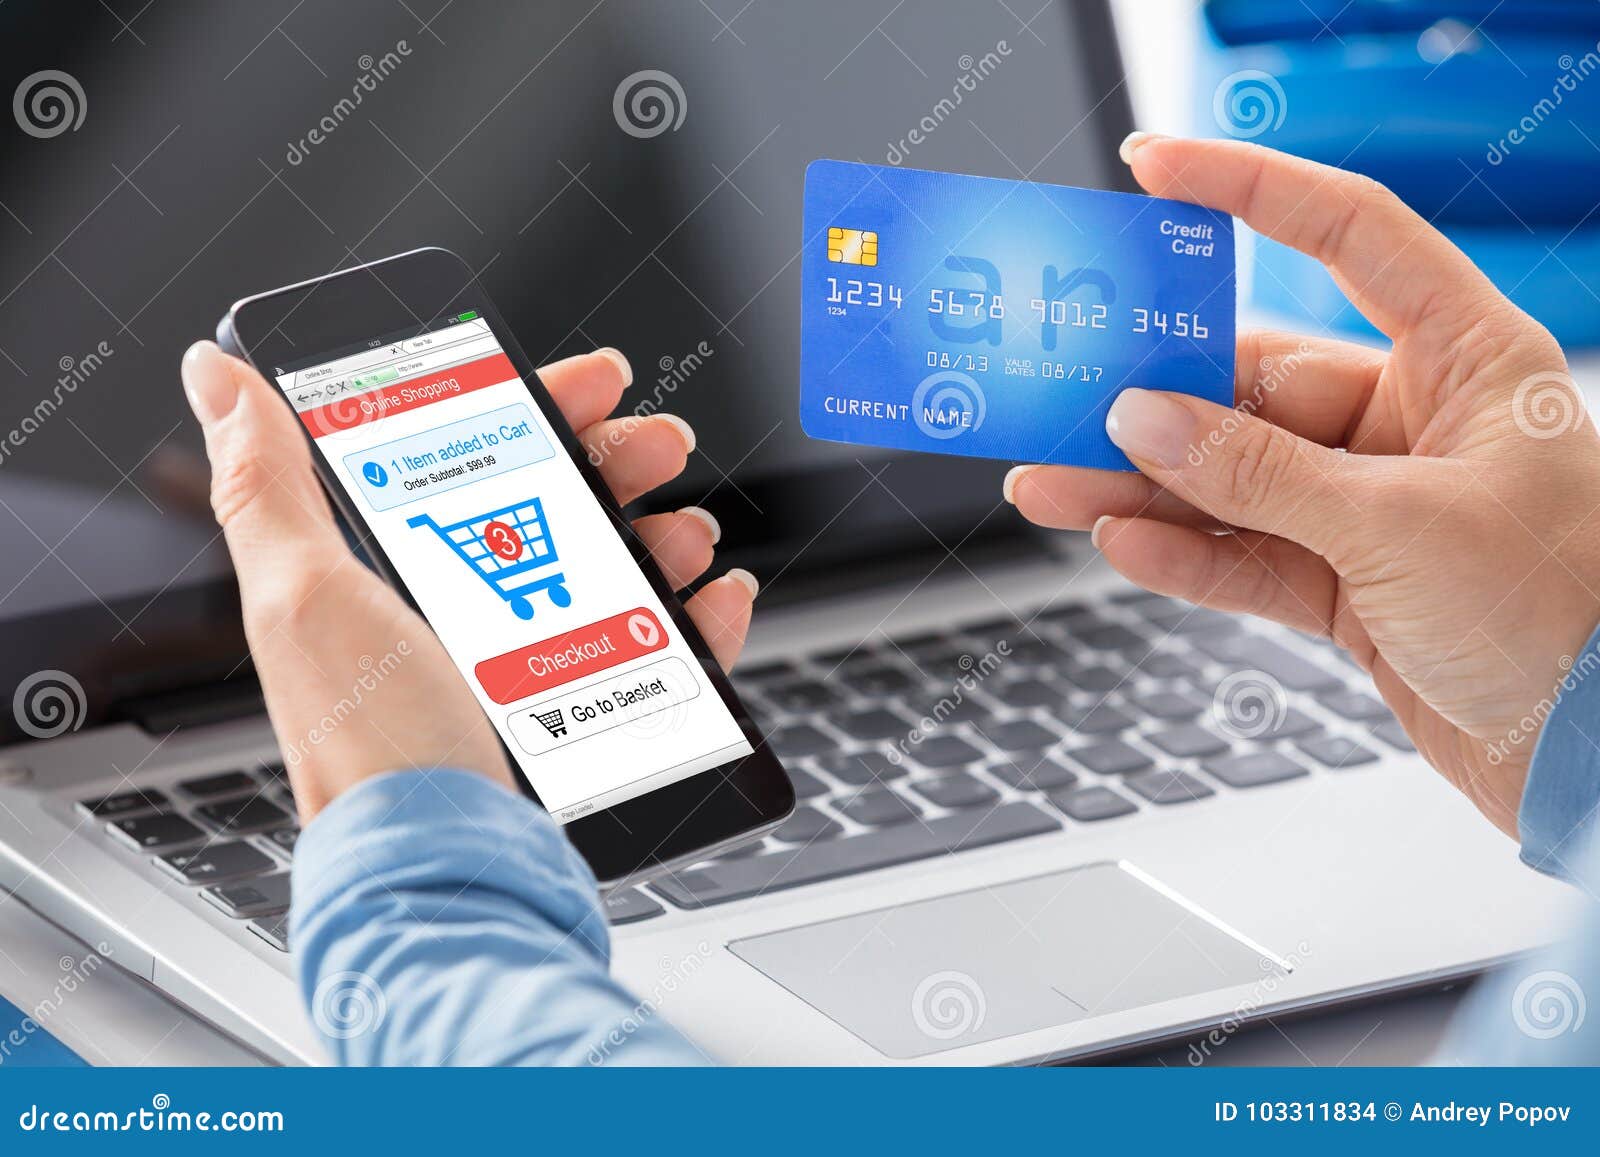 woman doing online shopping using credit card